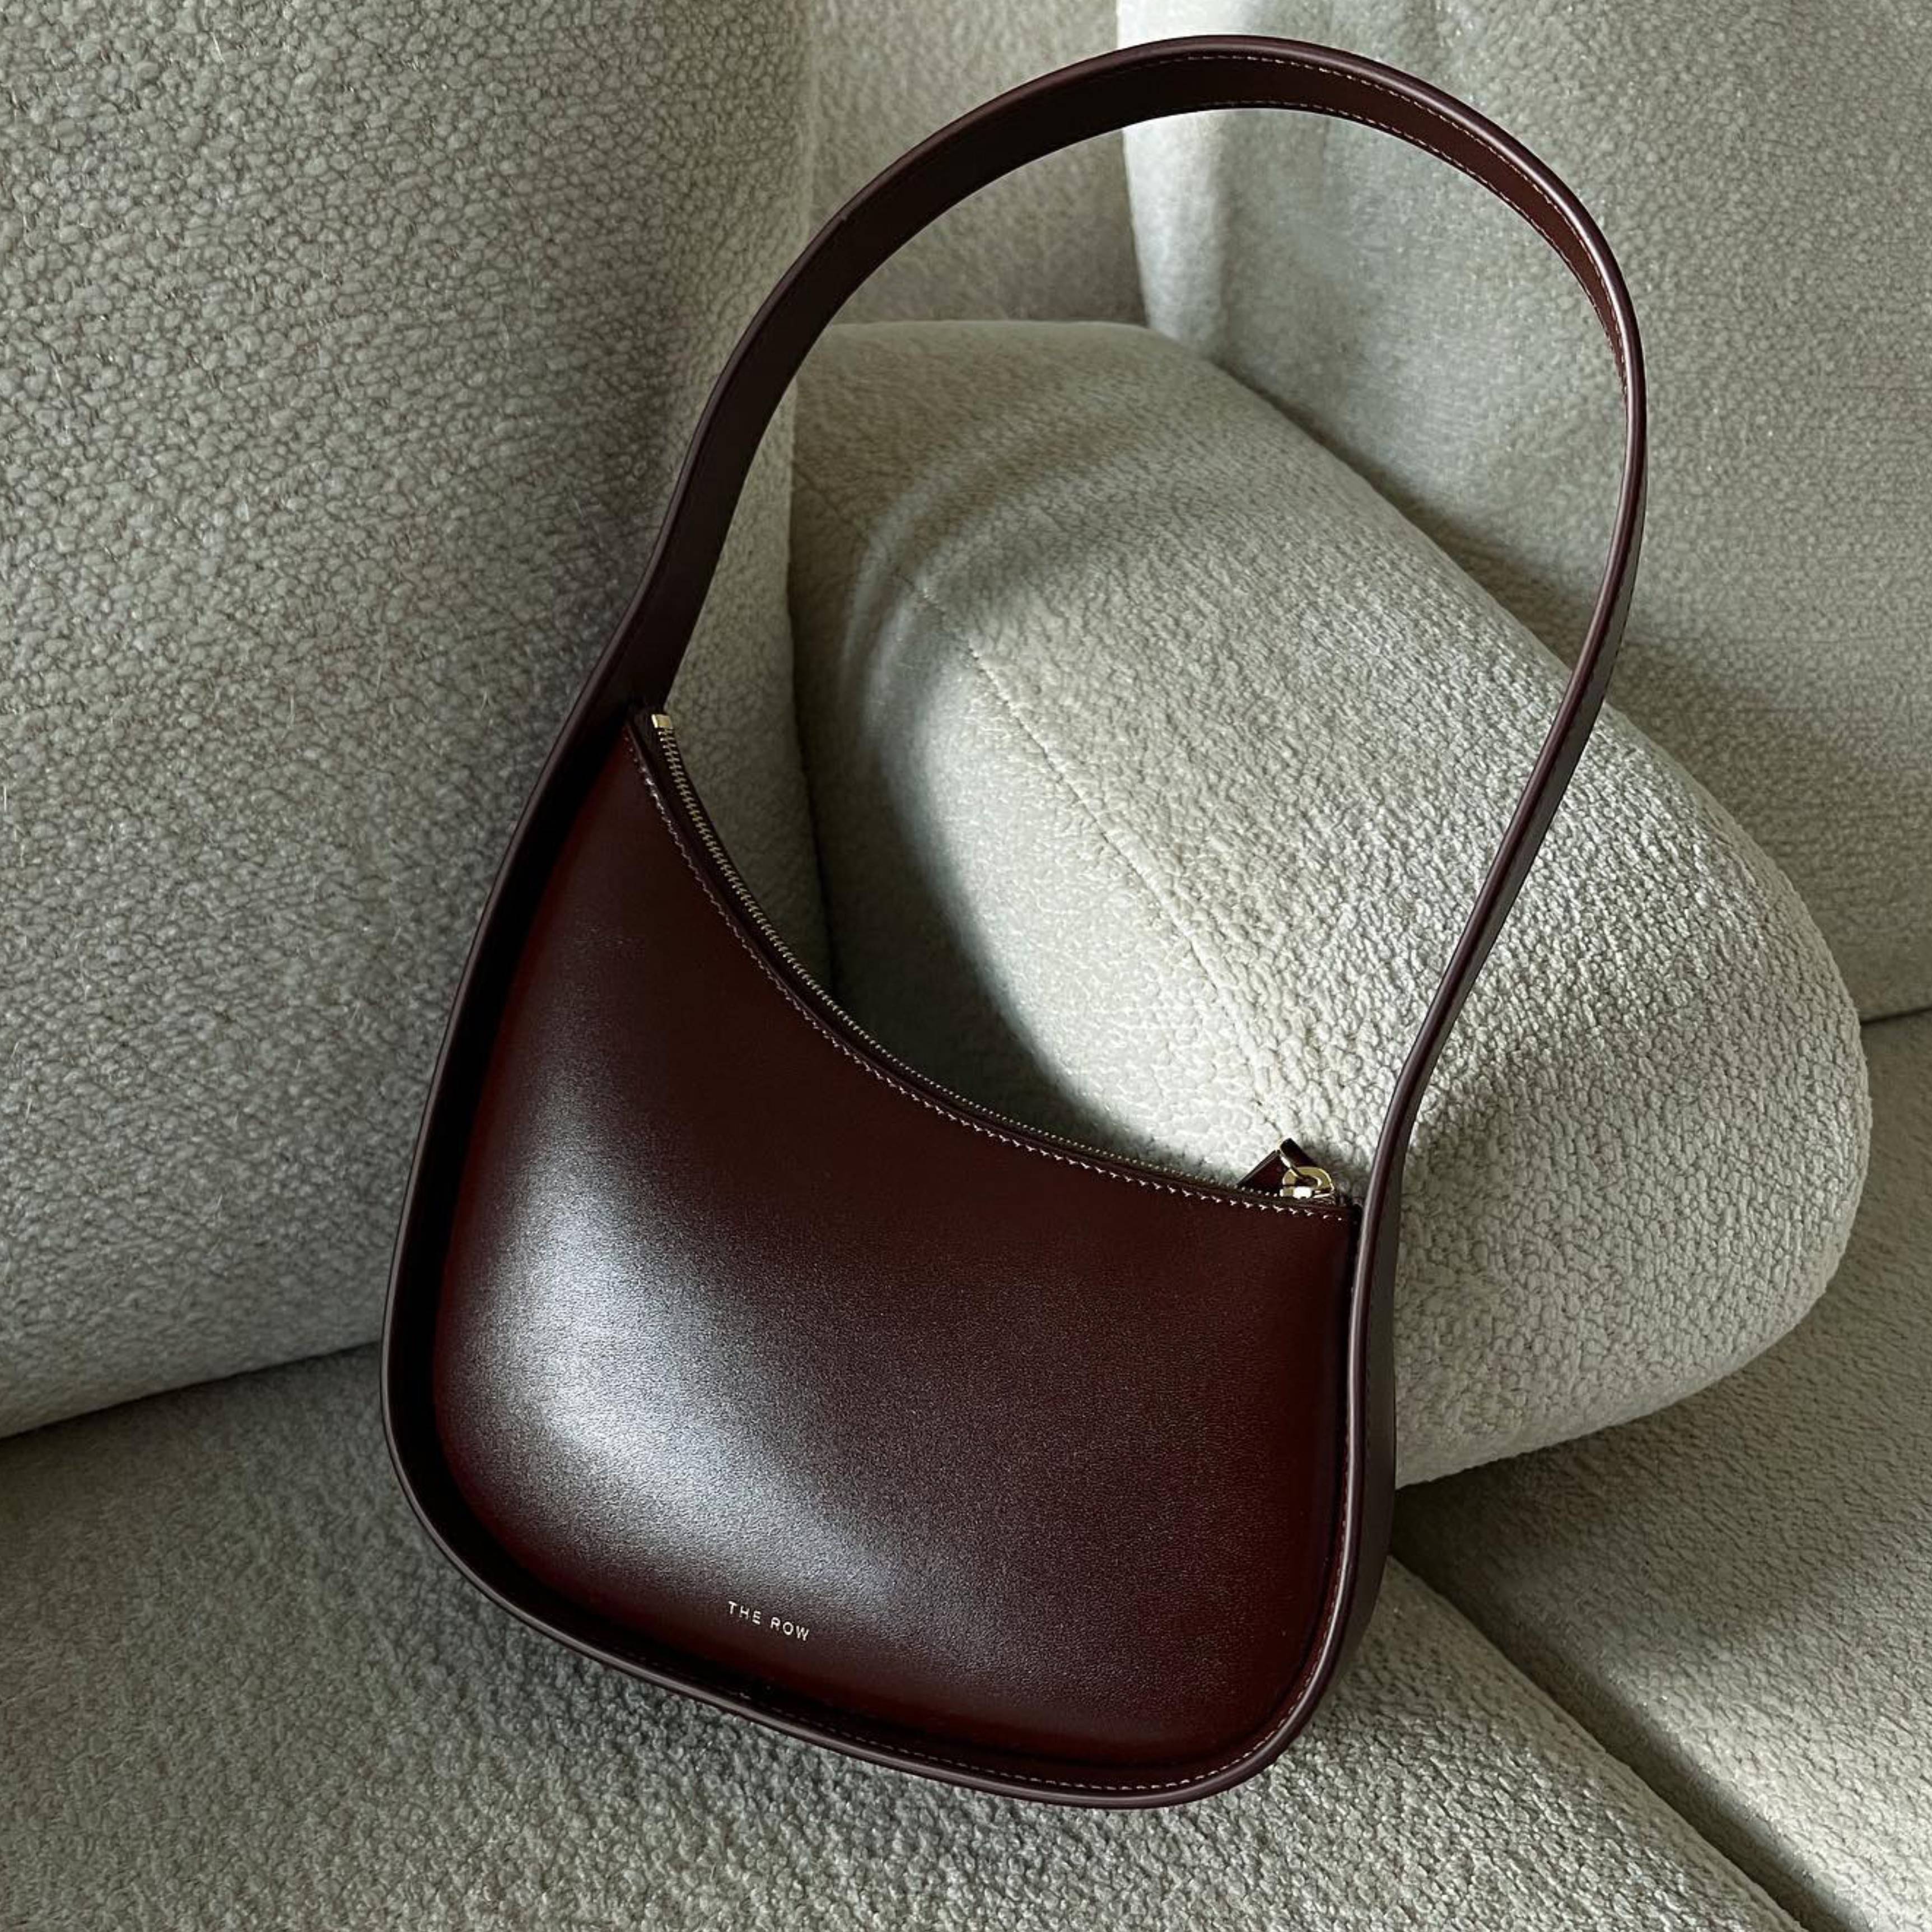 The Row's Half Moon Bag Is on Every Editor's Wish List | Who What Wear